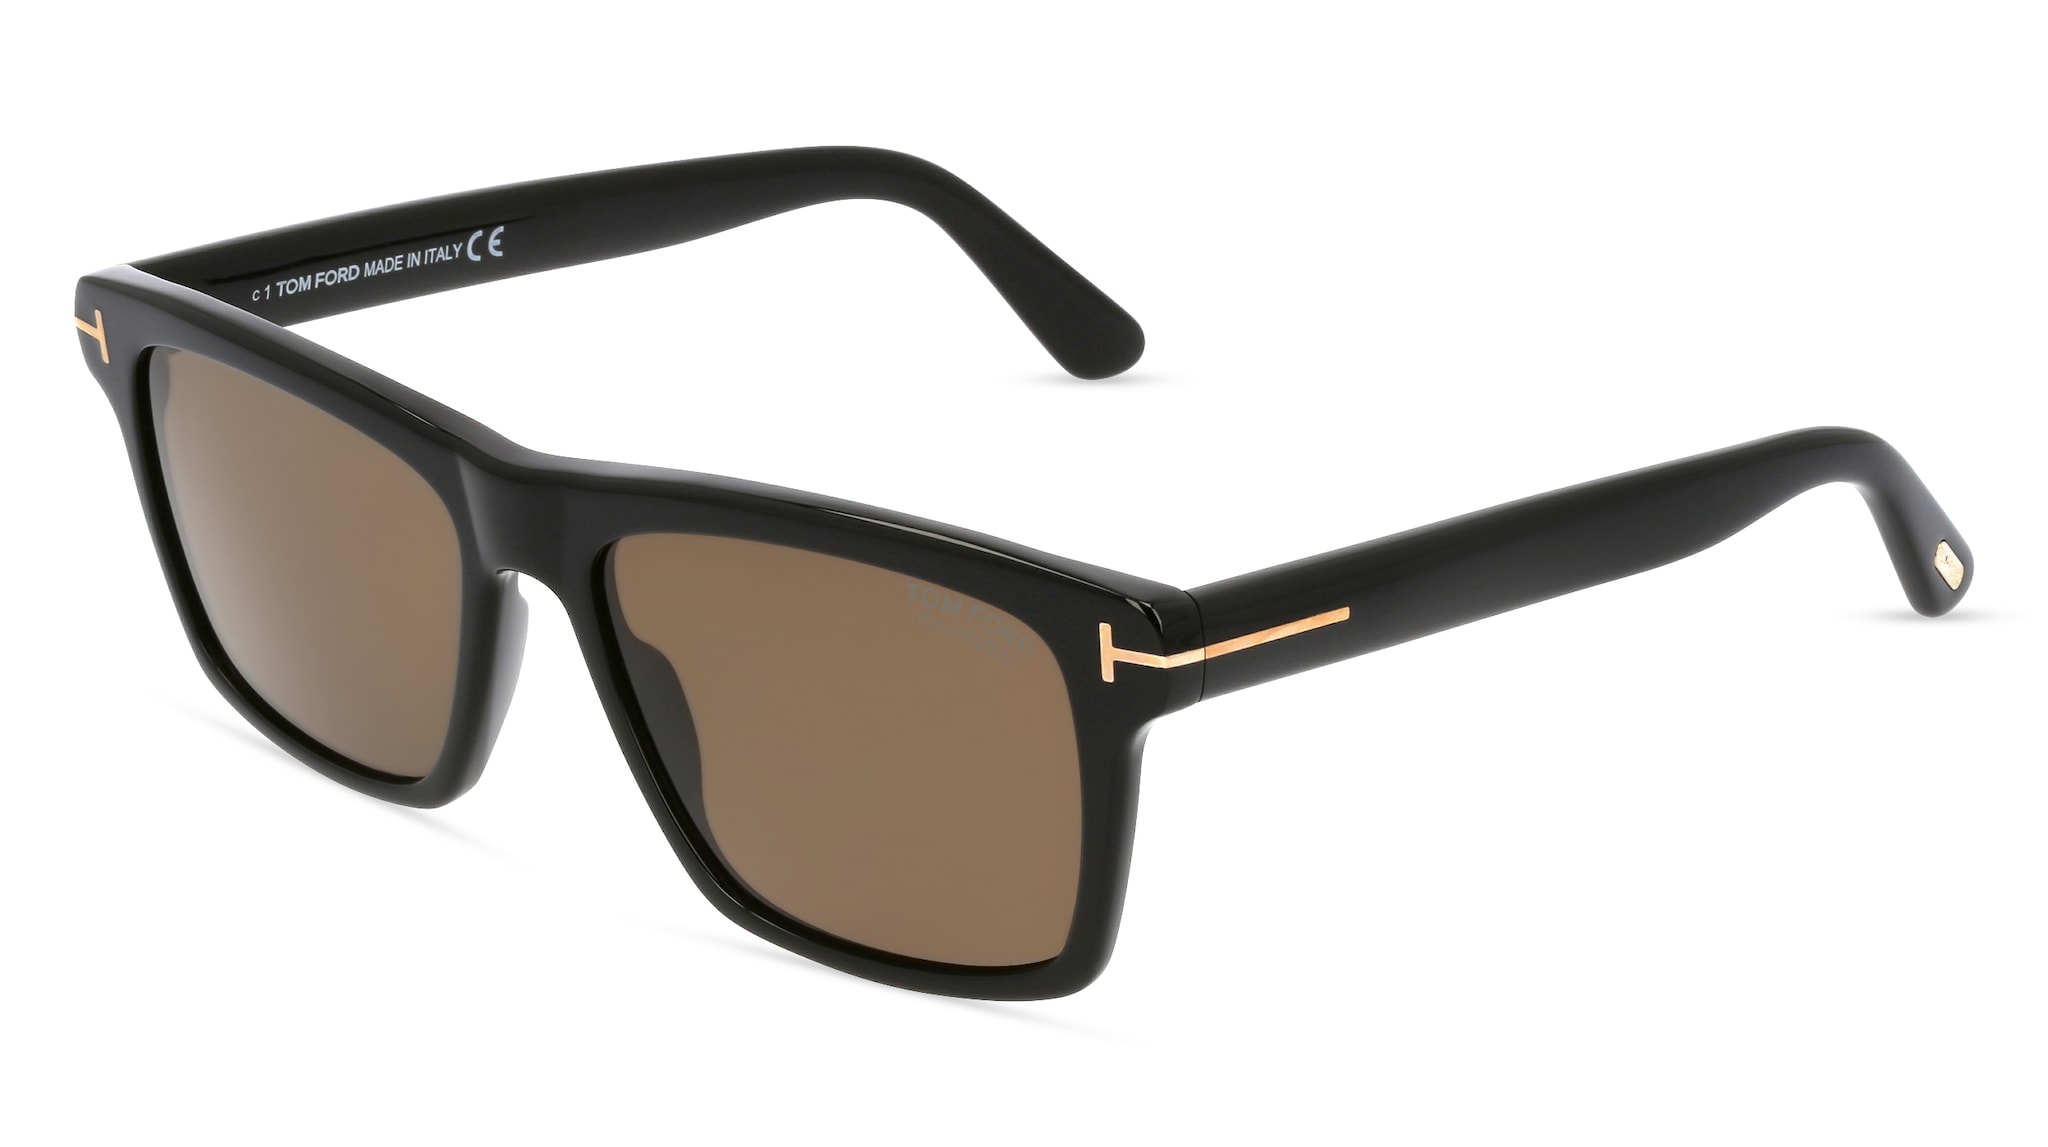 Tom Ford FT0906 BUCKLEY-02